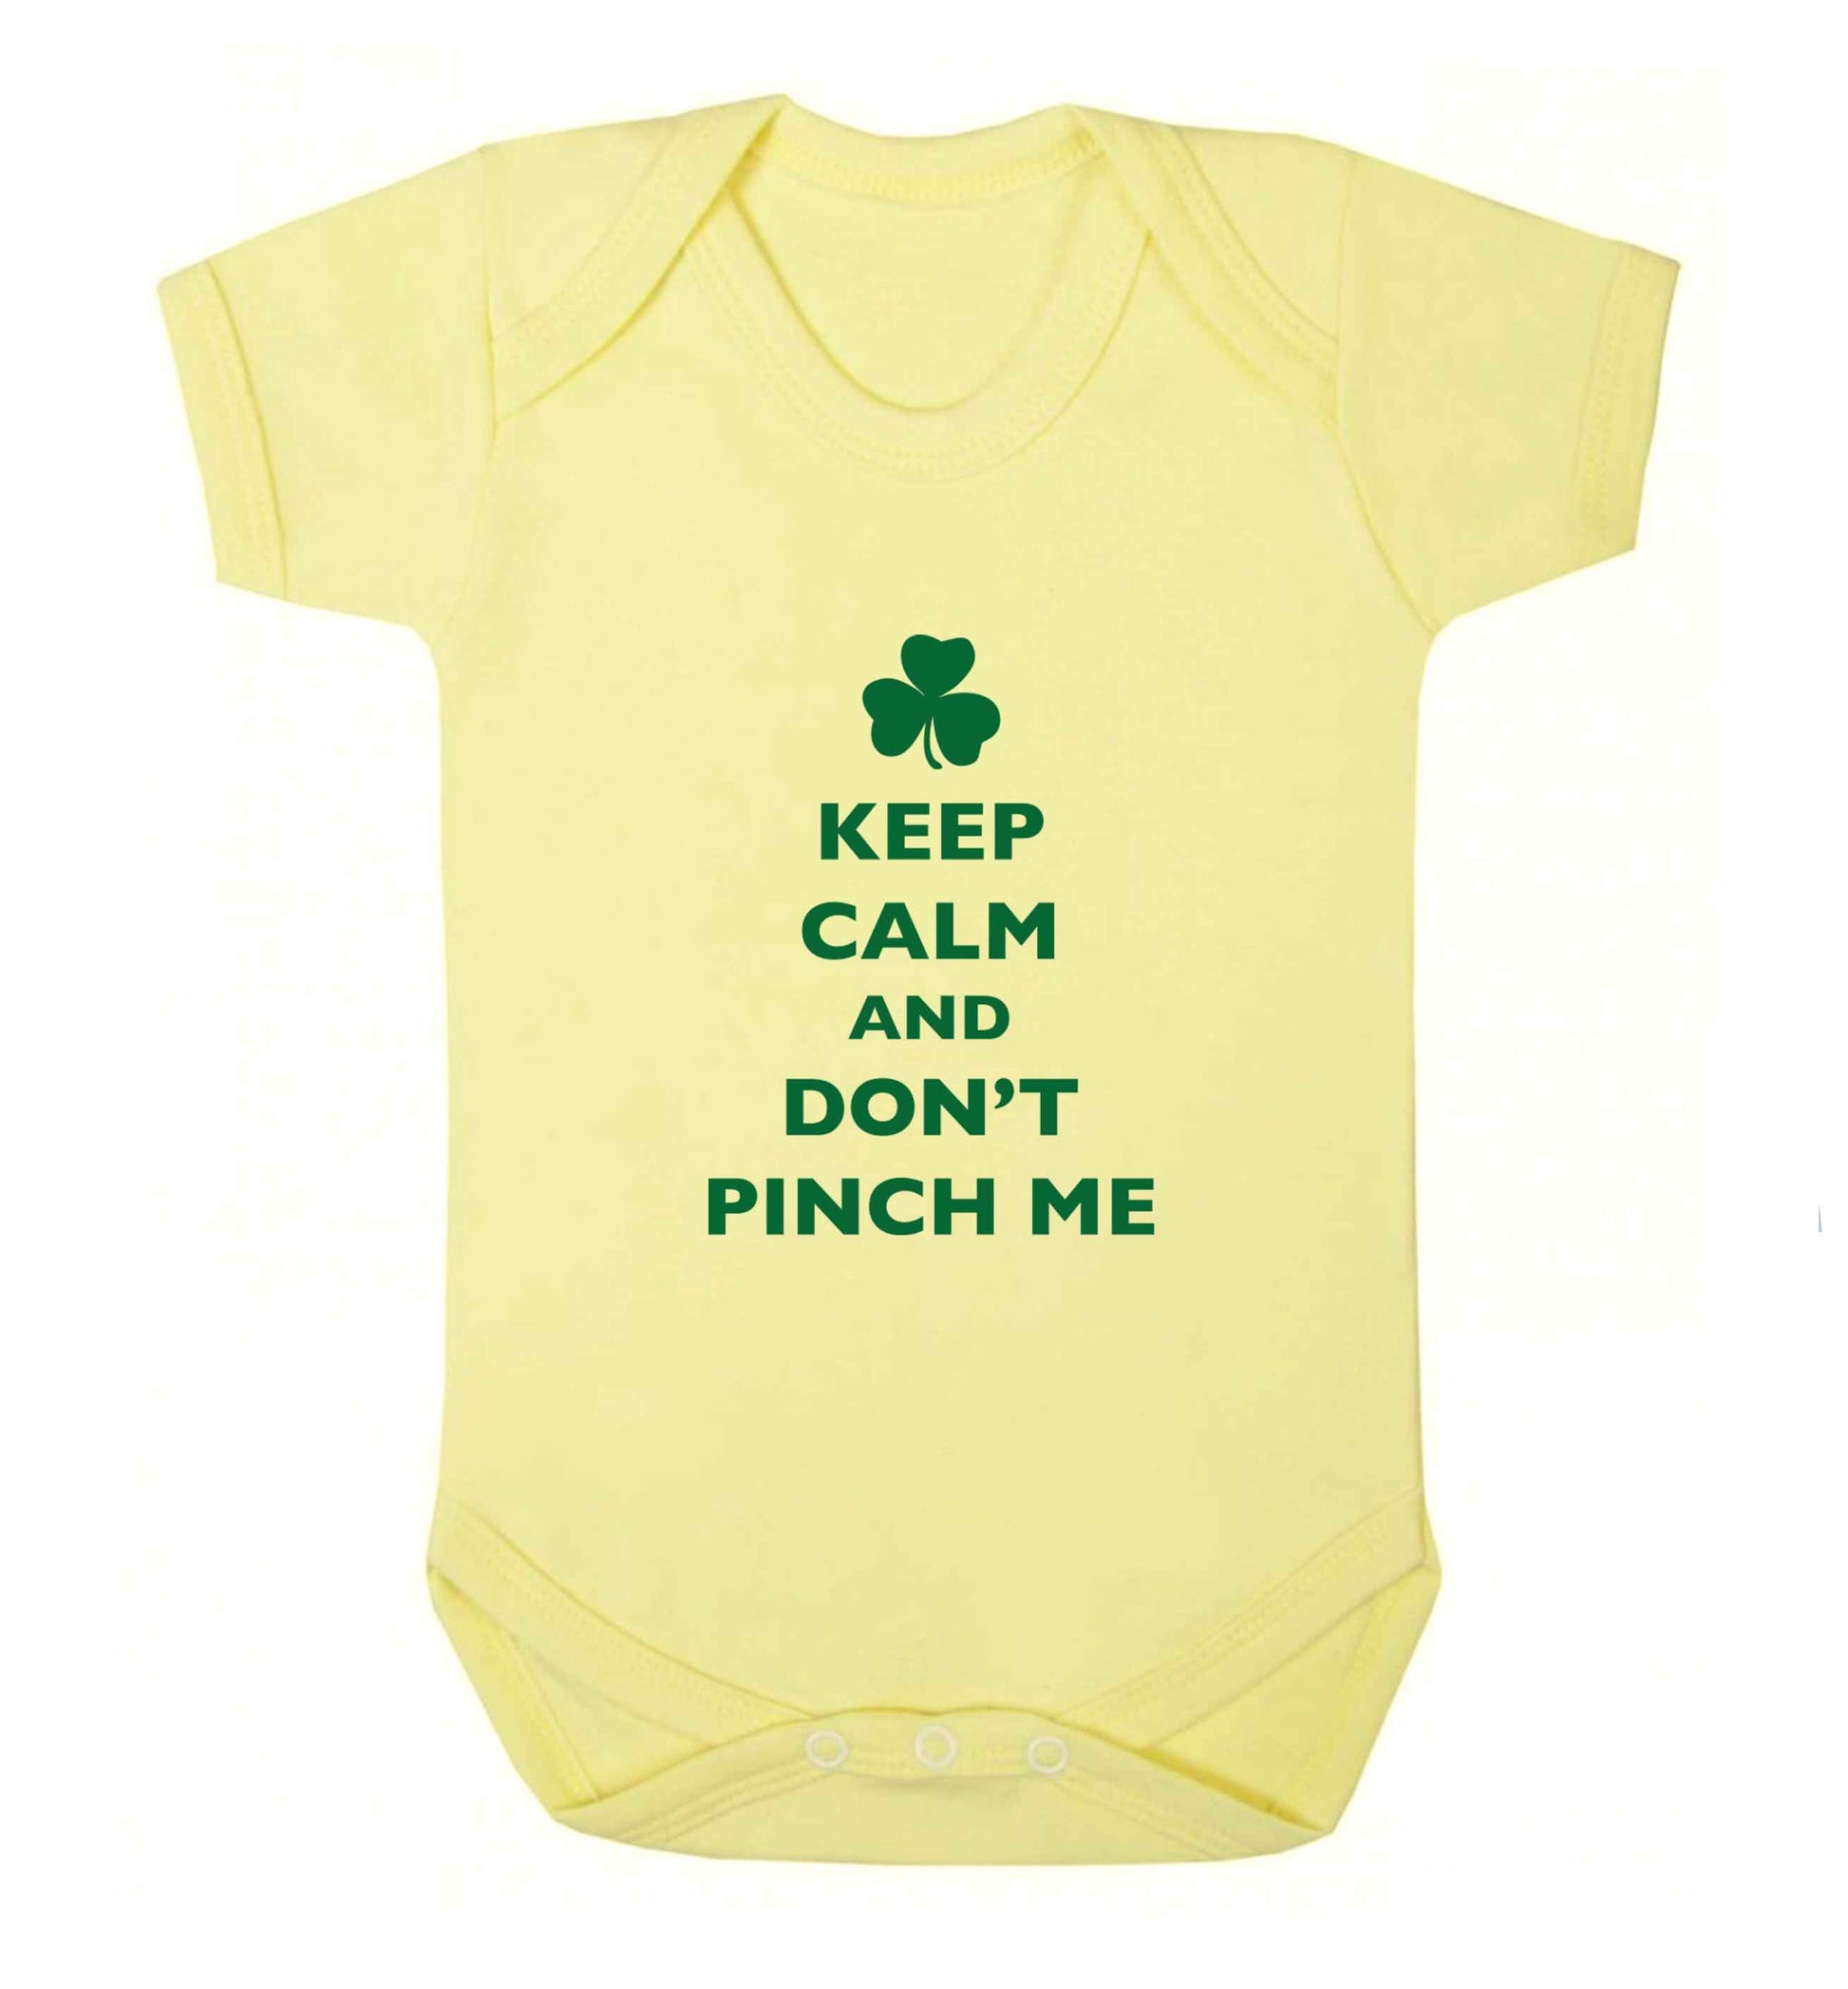 Keep calm and don't pinch me baby vest pale yellow 18-24 months